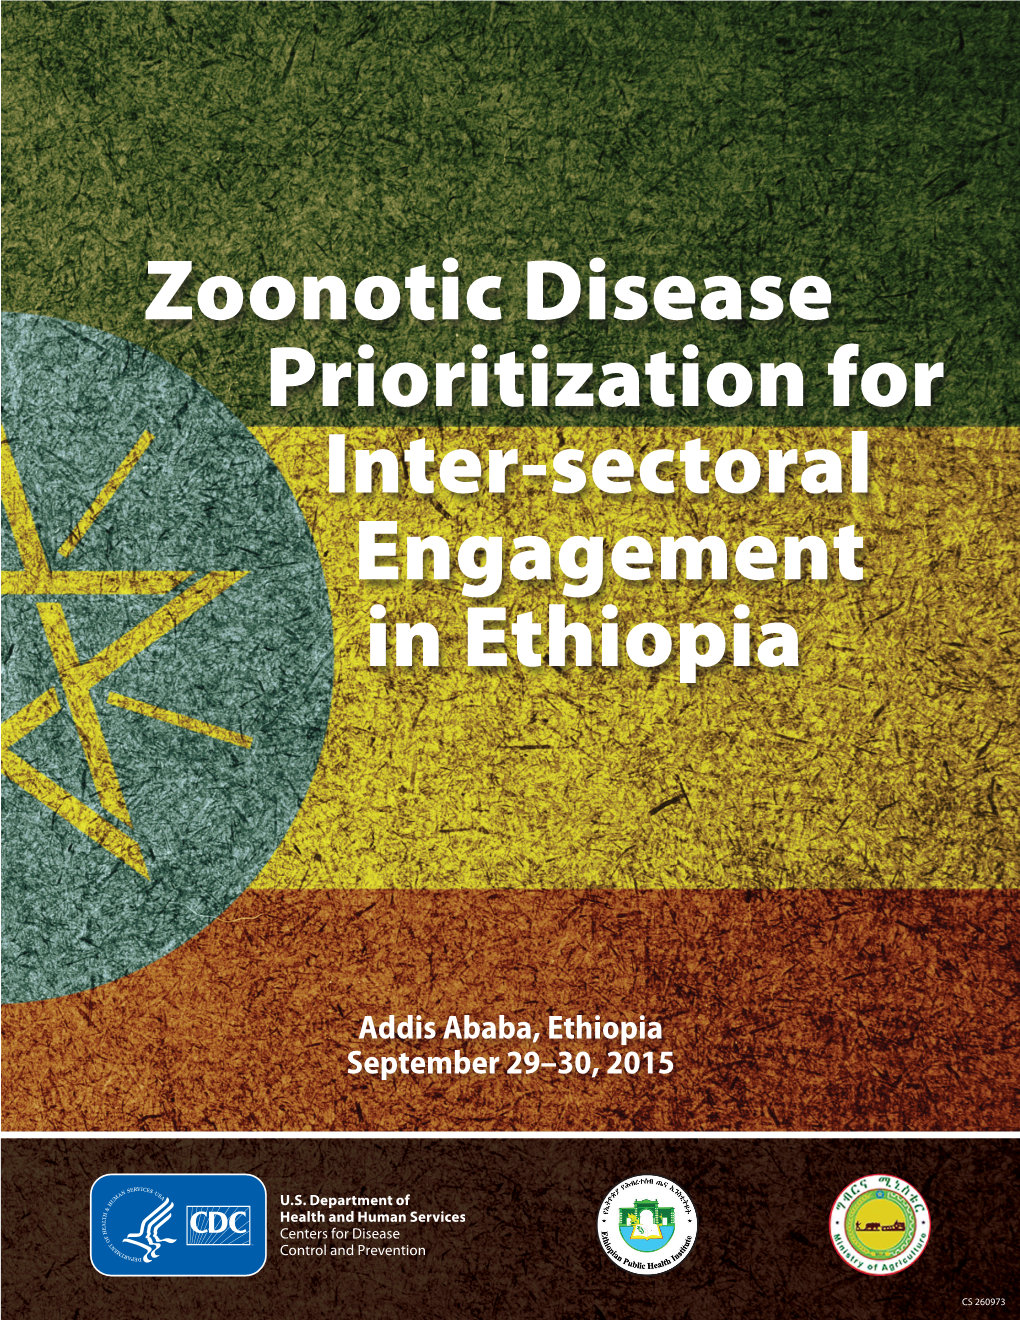 Zoonotic Disease Prioritization for Inter-Sectoral Engagement in Ethiopia